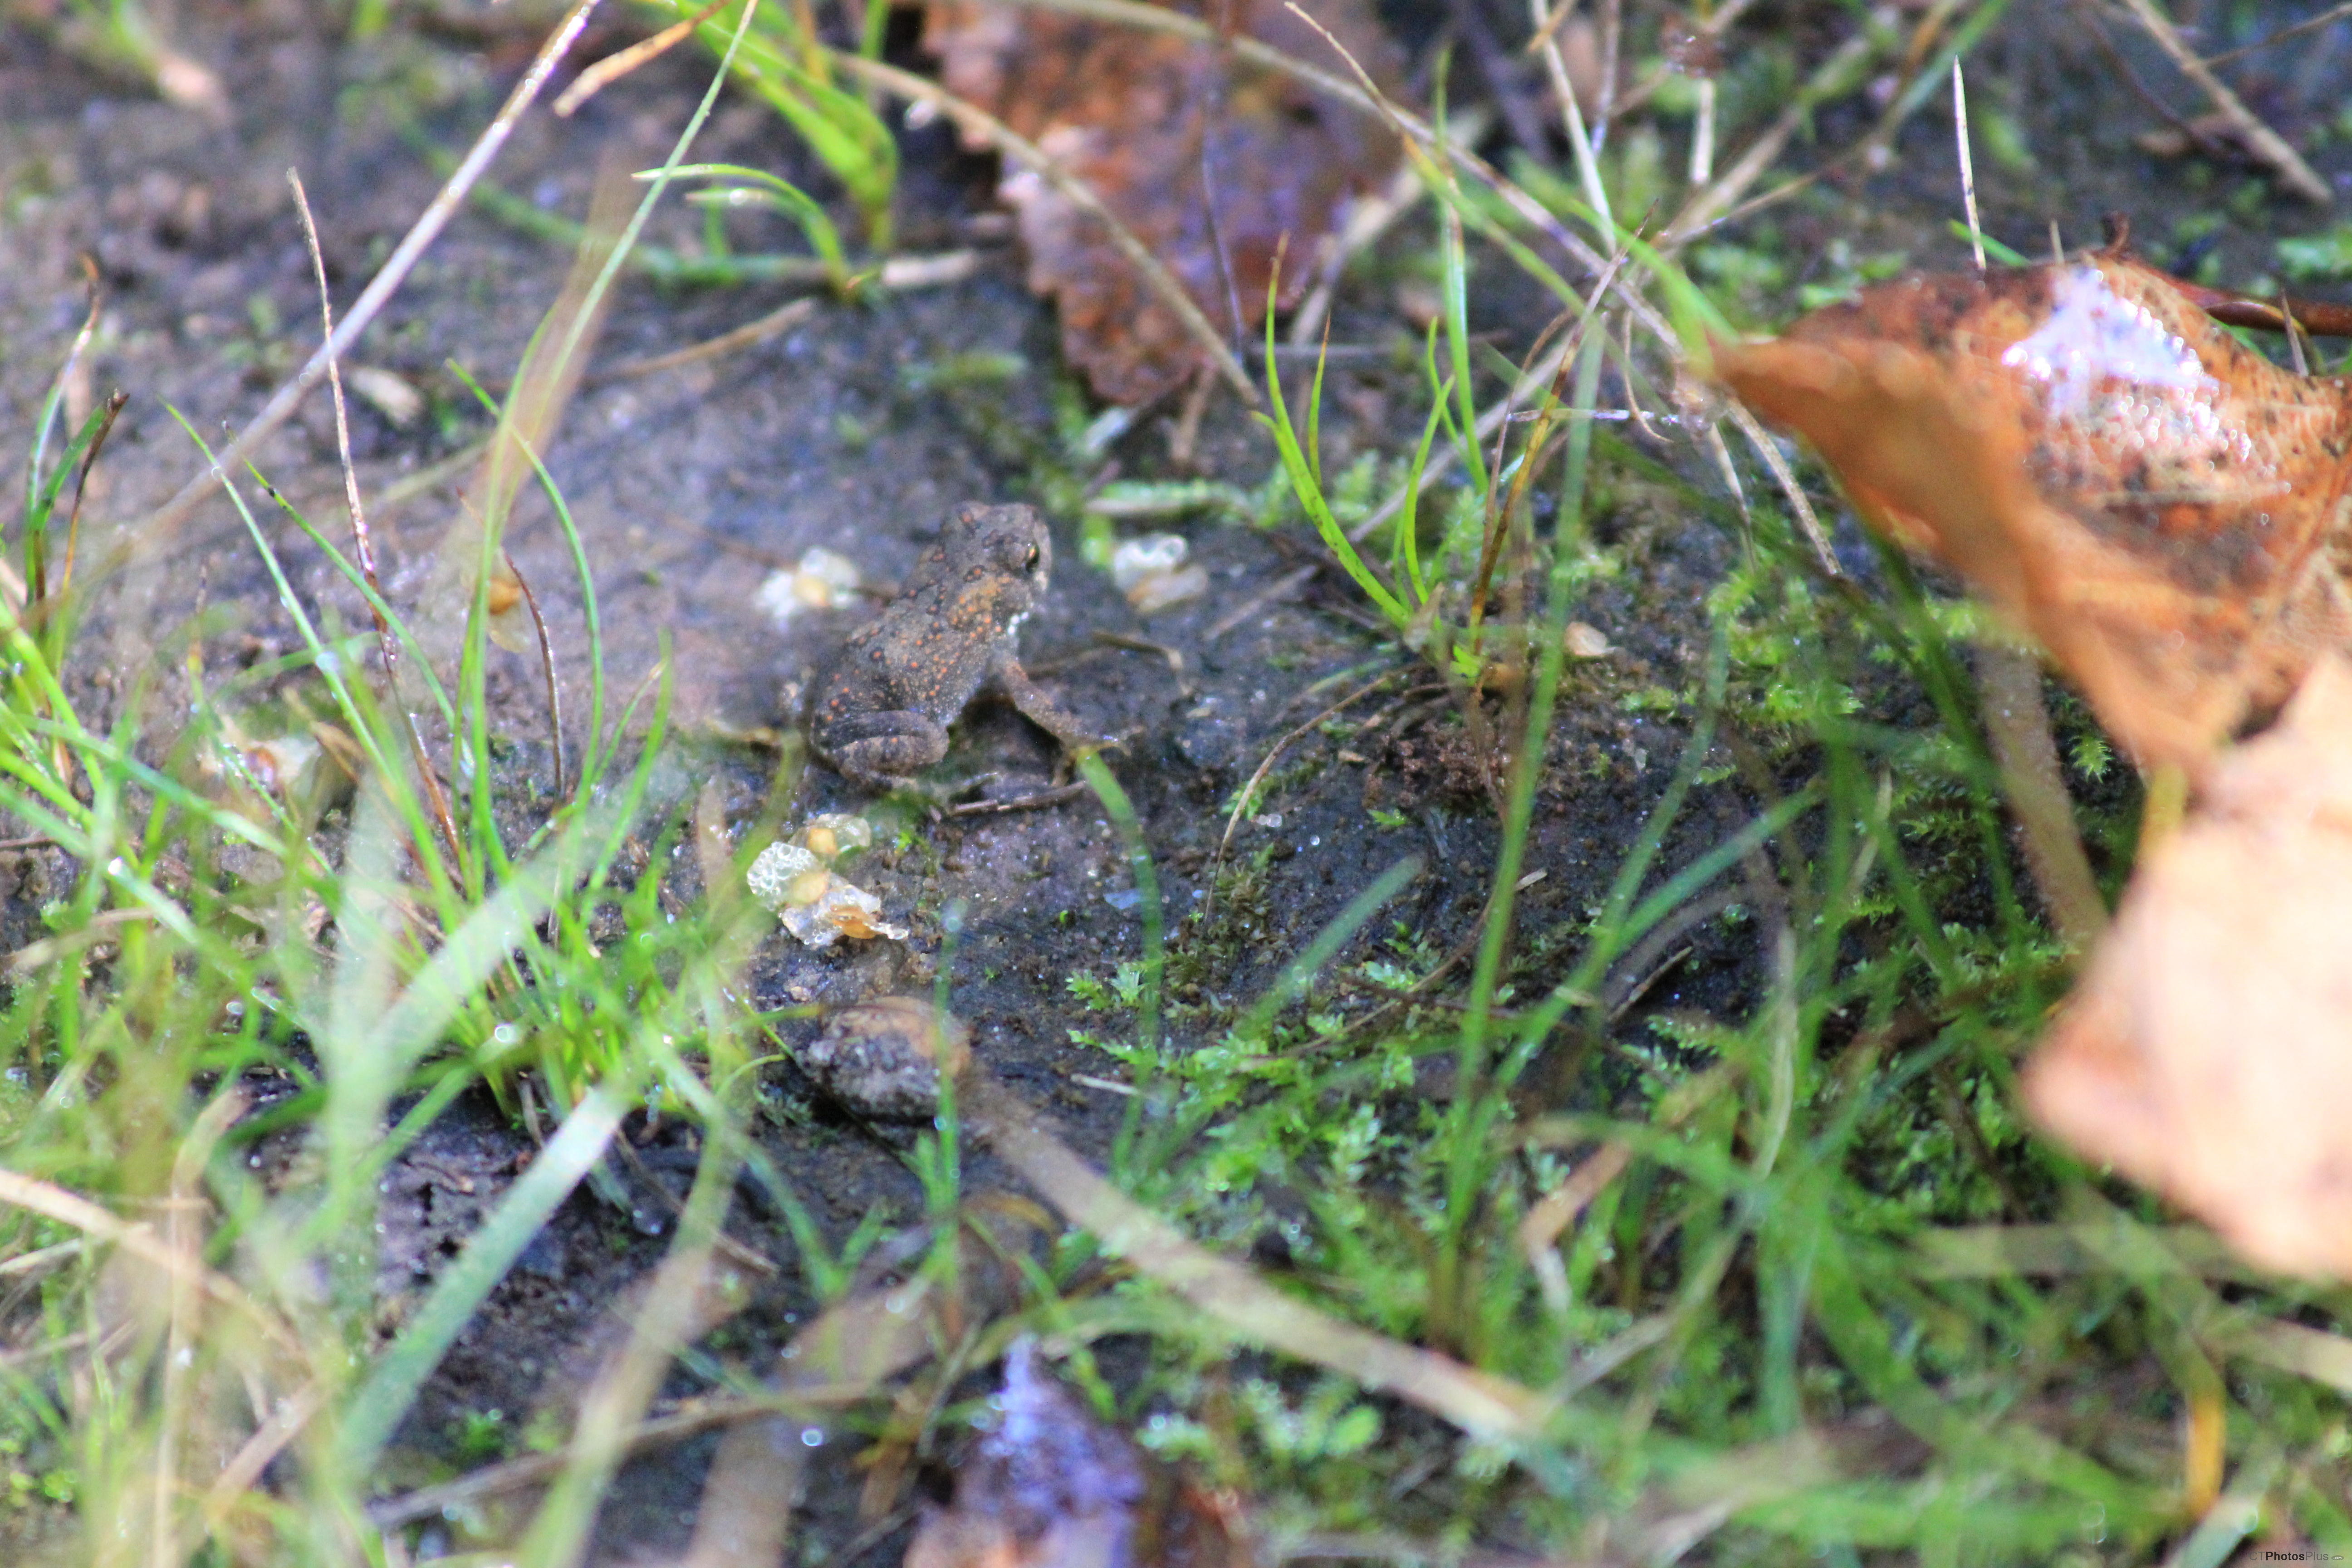 Tiny Eastern American Toad IMG 6751